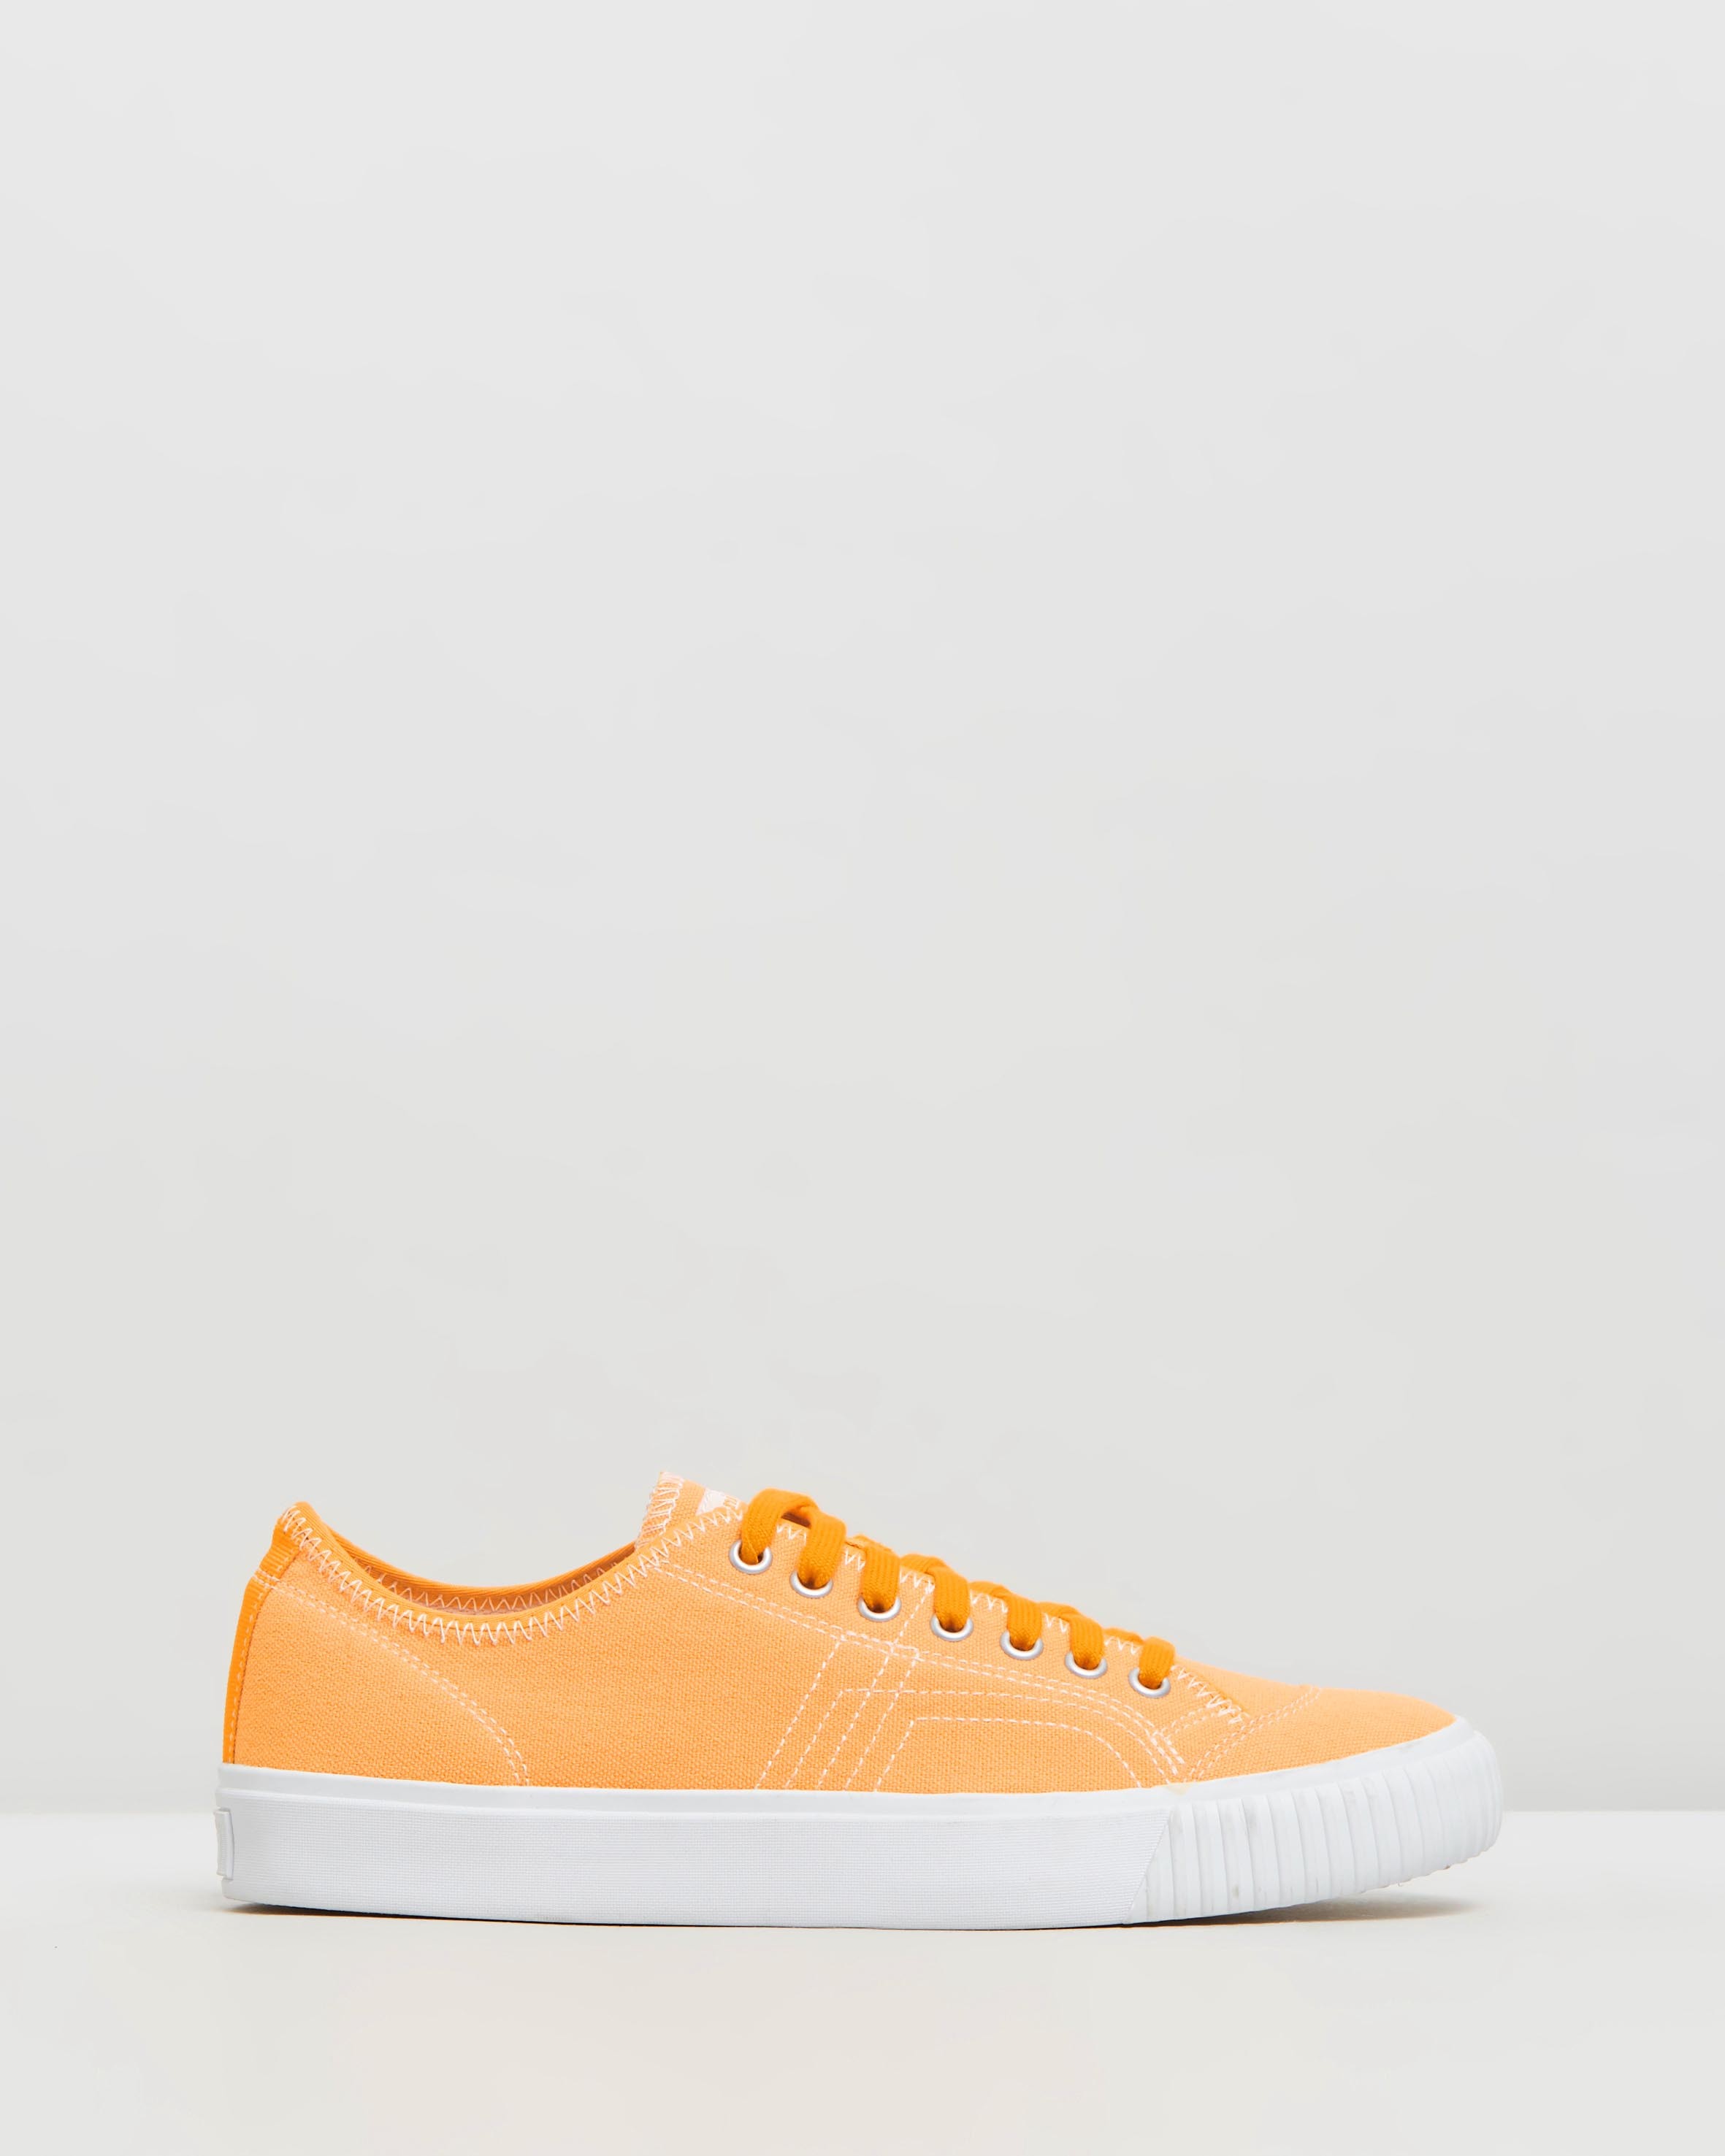 OK Basketball Lo - Unisex Citrus by Onitsuka Tiger | ShoeSales